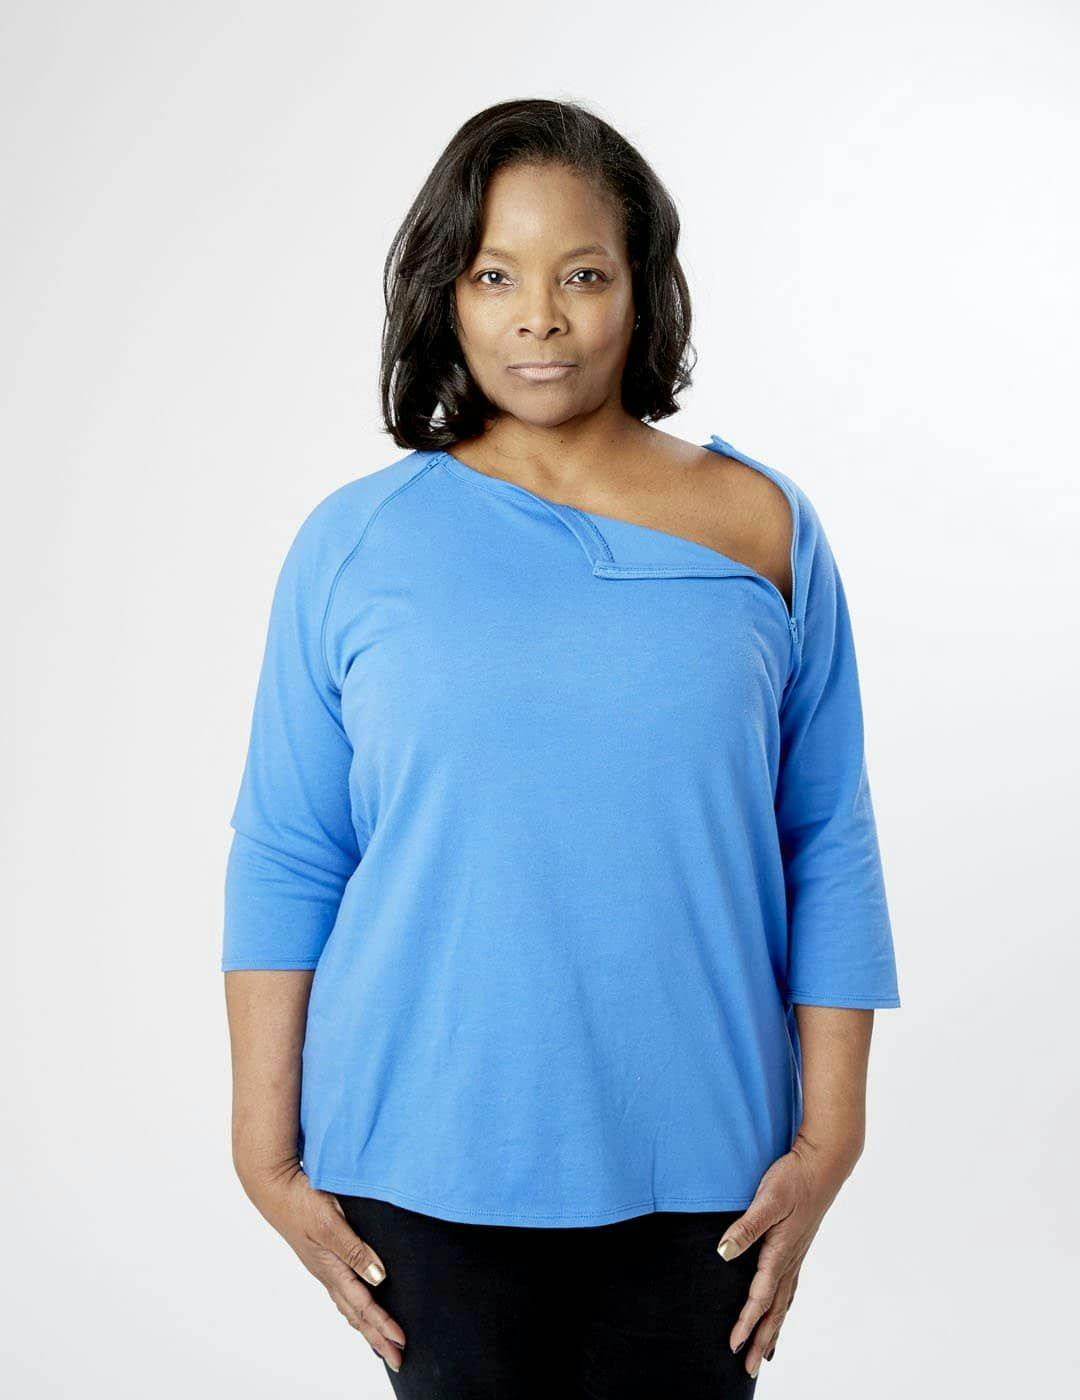 One blouse from Care+Wear  (Photo courtesy of Care+Wear)